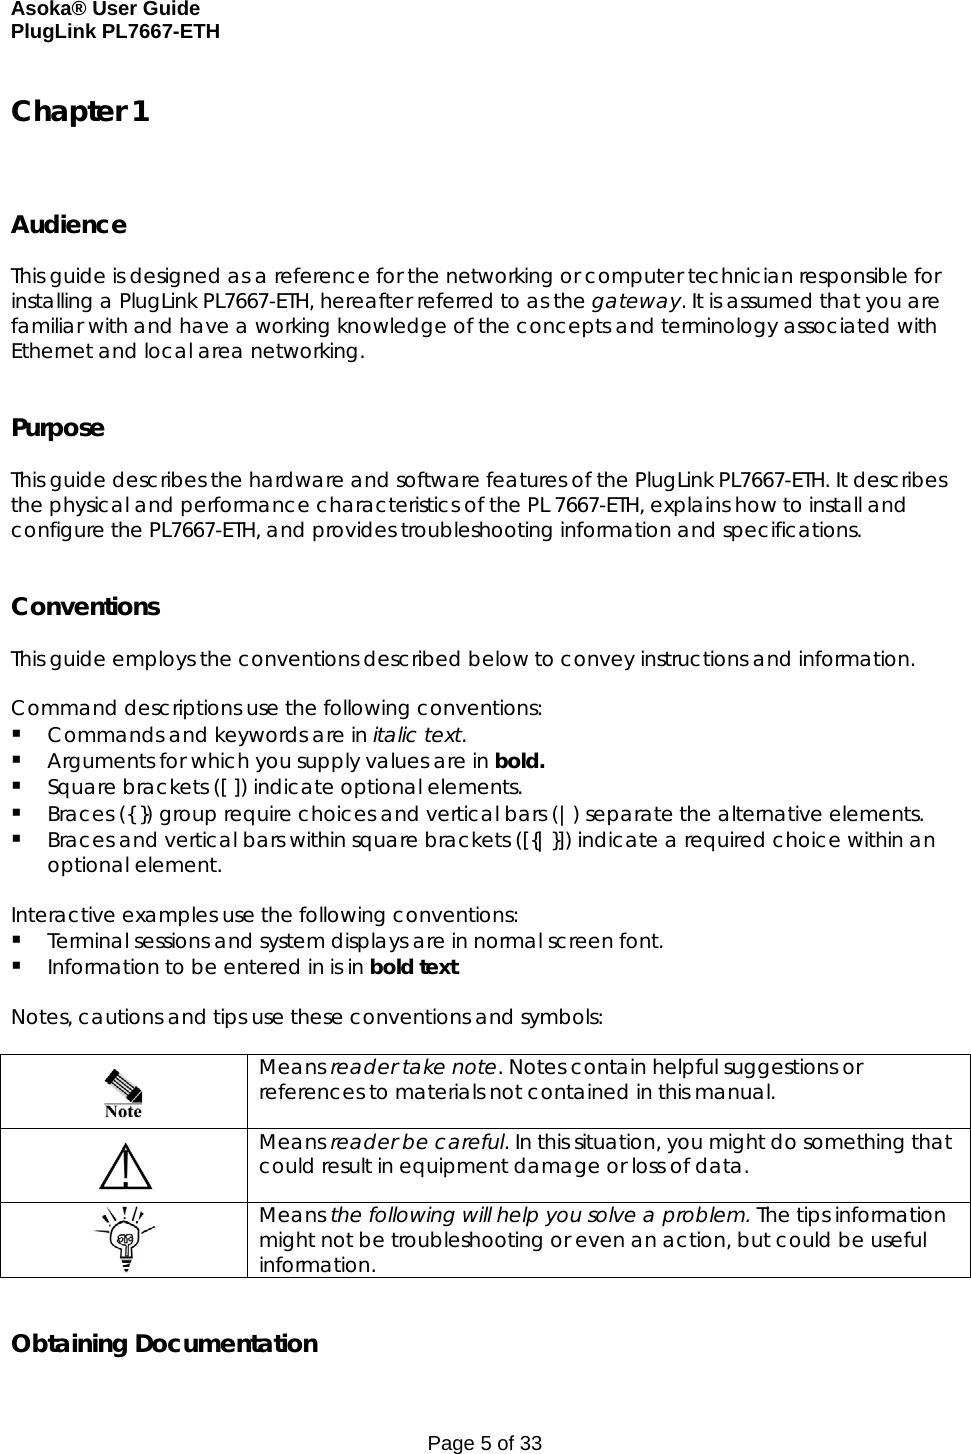 Asoka® User Guide  PlugLink PL7667-ETH Page 5 of 33 Chapter 1    Audience  This guide is designed as a reference for the networking or computer technician responsible for installing a PlugLink PL7667-ETH, hereafter referred to as the gateway. It is assumed that you are familiar with and have a working knowledge of the concepts and terminology associated with Ethernet and local area networking.   Purpose  This guide describes the hardware and software features of the PlugLink PL7667-ETH. It describes the physical and performance characteristics of the PL 7667-ETH, explains how to install and configure the PL7667-ETH, and provides troubleshooting information and specifications.   Conventions  This guide employs the conventions described below to convey instructions and information.  Command descriptions use the following conventions:  Commands and keywords are in italic text.  Arguments for which you supply values are in bold.   Square brackets ([ ]) indicate optional elements.  Braces ({ }) group require choices and vertical bars (|) separate the alternative elements.  Braces and vertical bars within square brackets ([{|}]) indicate a required choice within an optional element.  Interactive examples use the following conventions:  Terminal sessions and system displays are in normal screen font.  Information to be entered in is in bold text.  Notes, cautions and tips use these conventions and symbols:    Means reader take note. Notes contain helpful suggestions or references to materials not contained in this manual.  Means reader be careful. In this situation, you might do something that could result in equipment damage or loss of data.  Means the following will help you solve a problem. The tips information might not be troubleshooting or even an action, but could be useful information.   Obtaining Documentation 